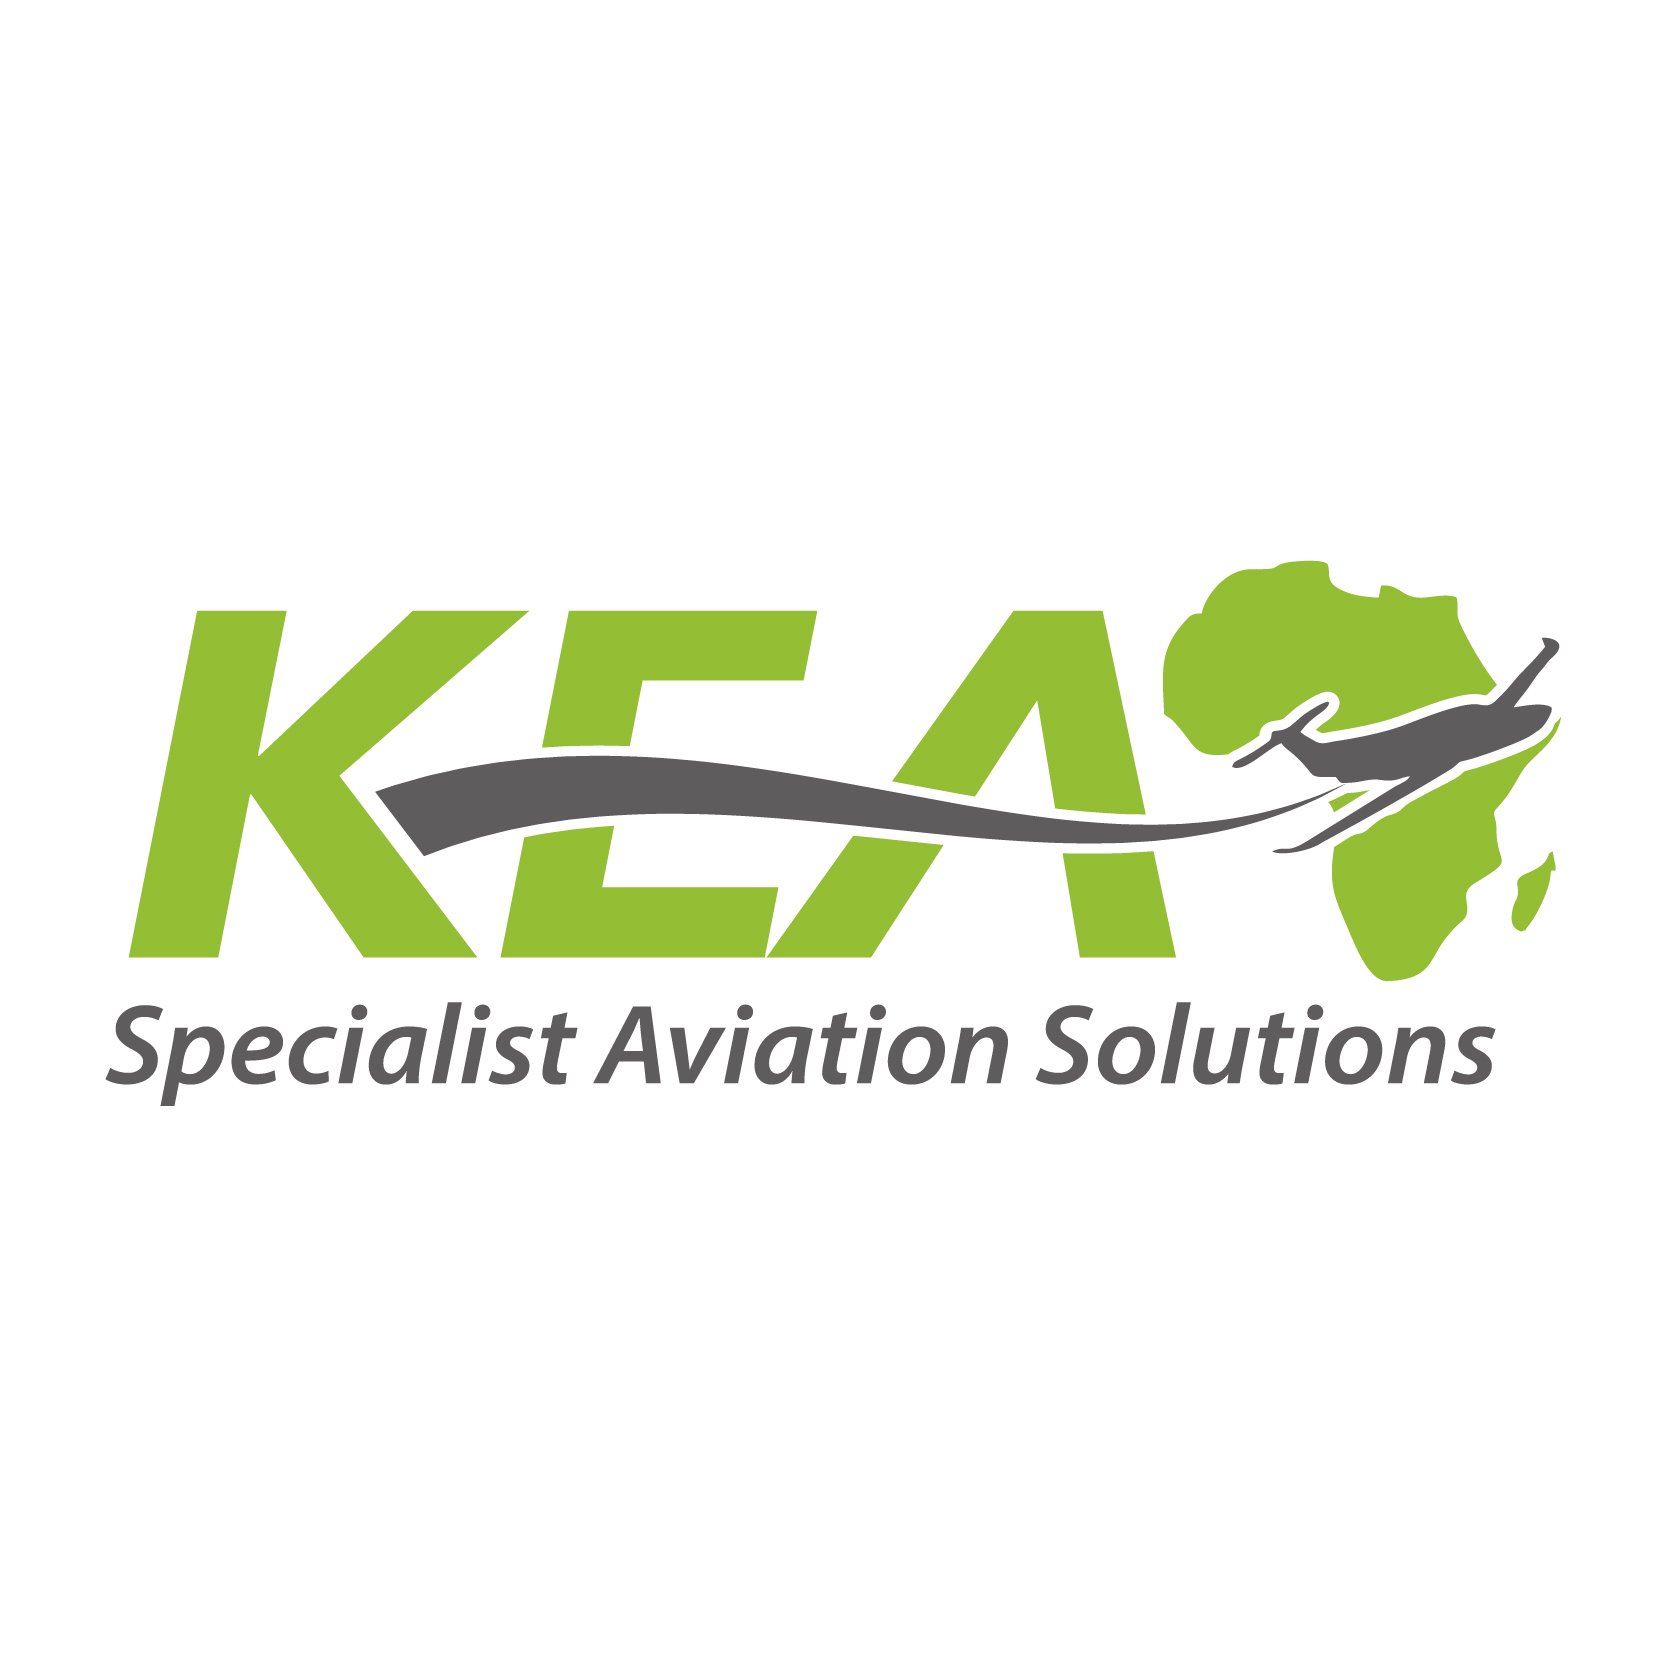 A regional #aviation service provider to oil, gas & mining, humanitarian, private & Gov't clientele.